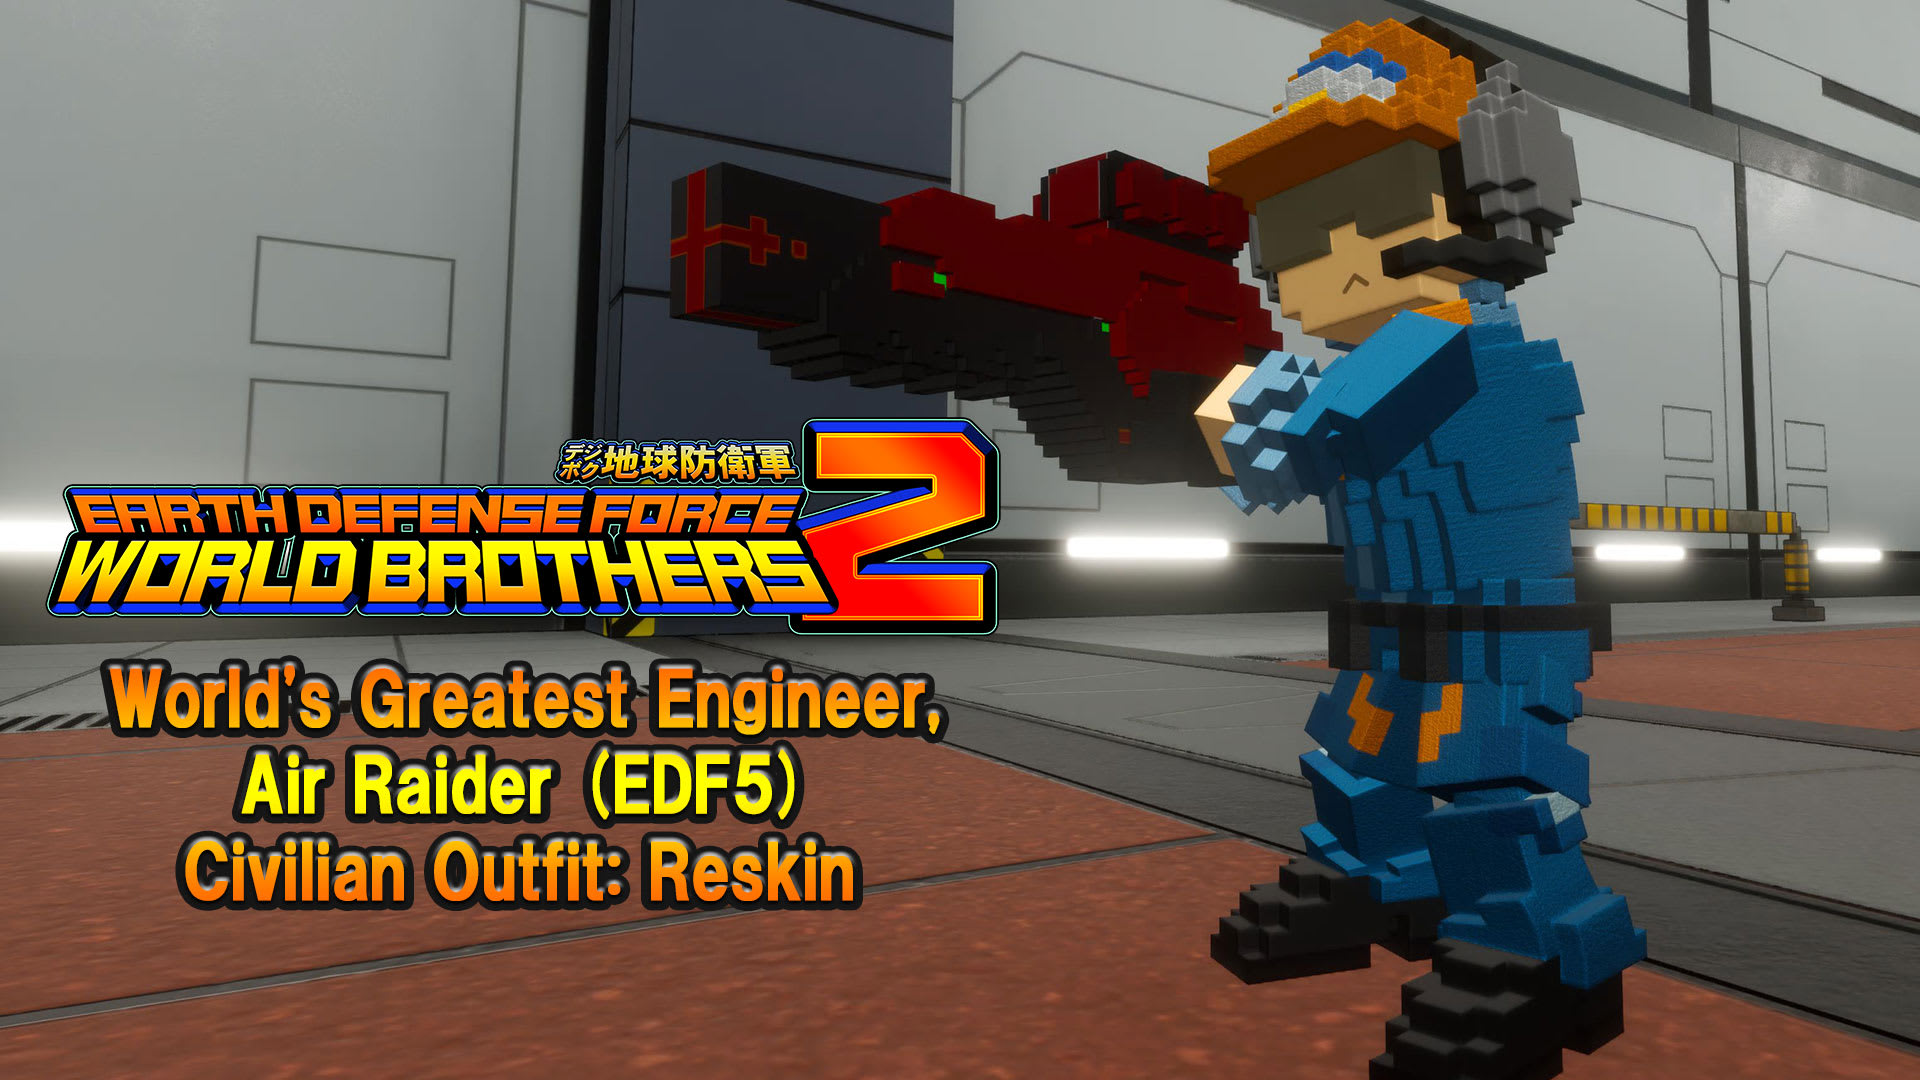 "Additional character" World's Greatest Engineer, Air Raider (EDF5) Civilian Outfit: Reskin